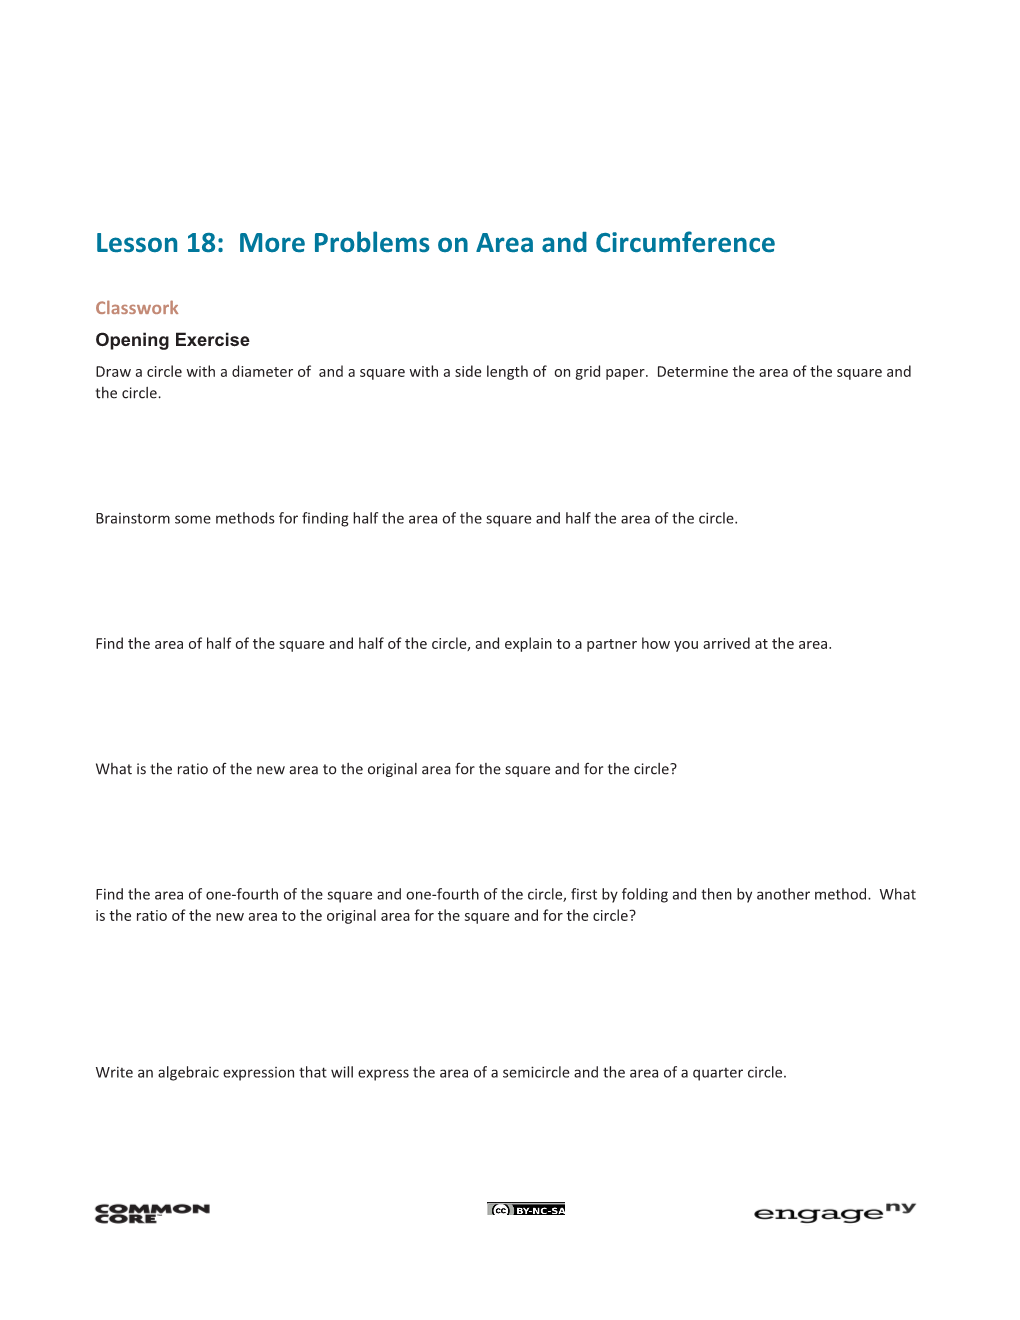 Lesson 18: More Problems on Area and Circumference